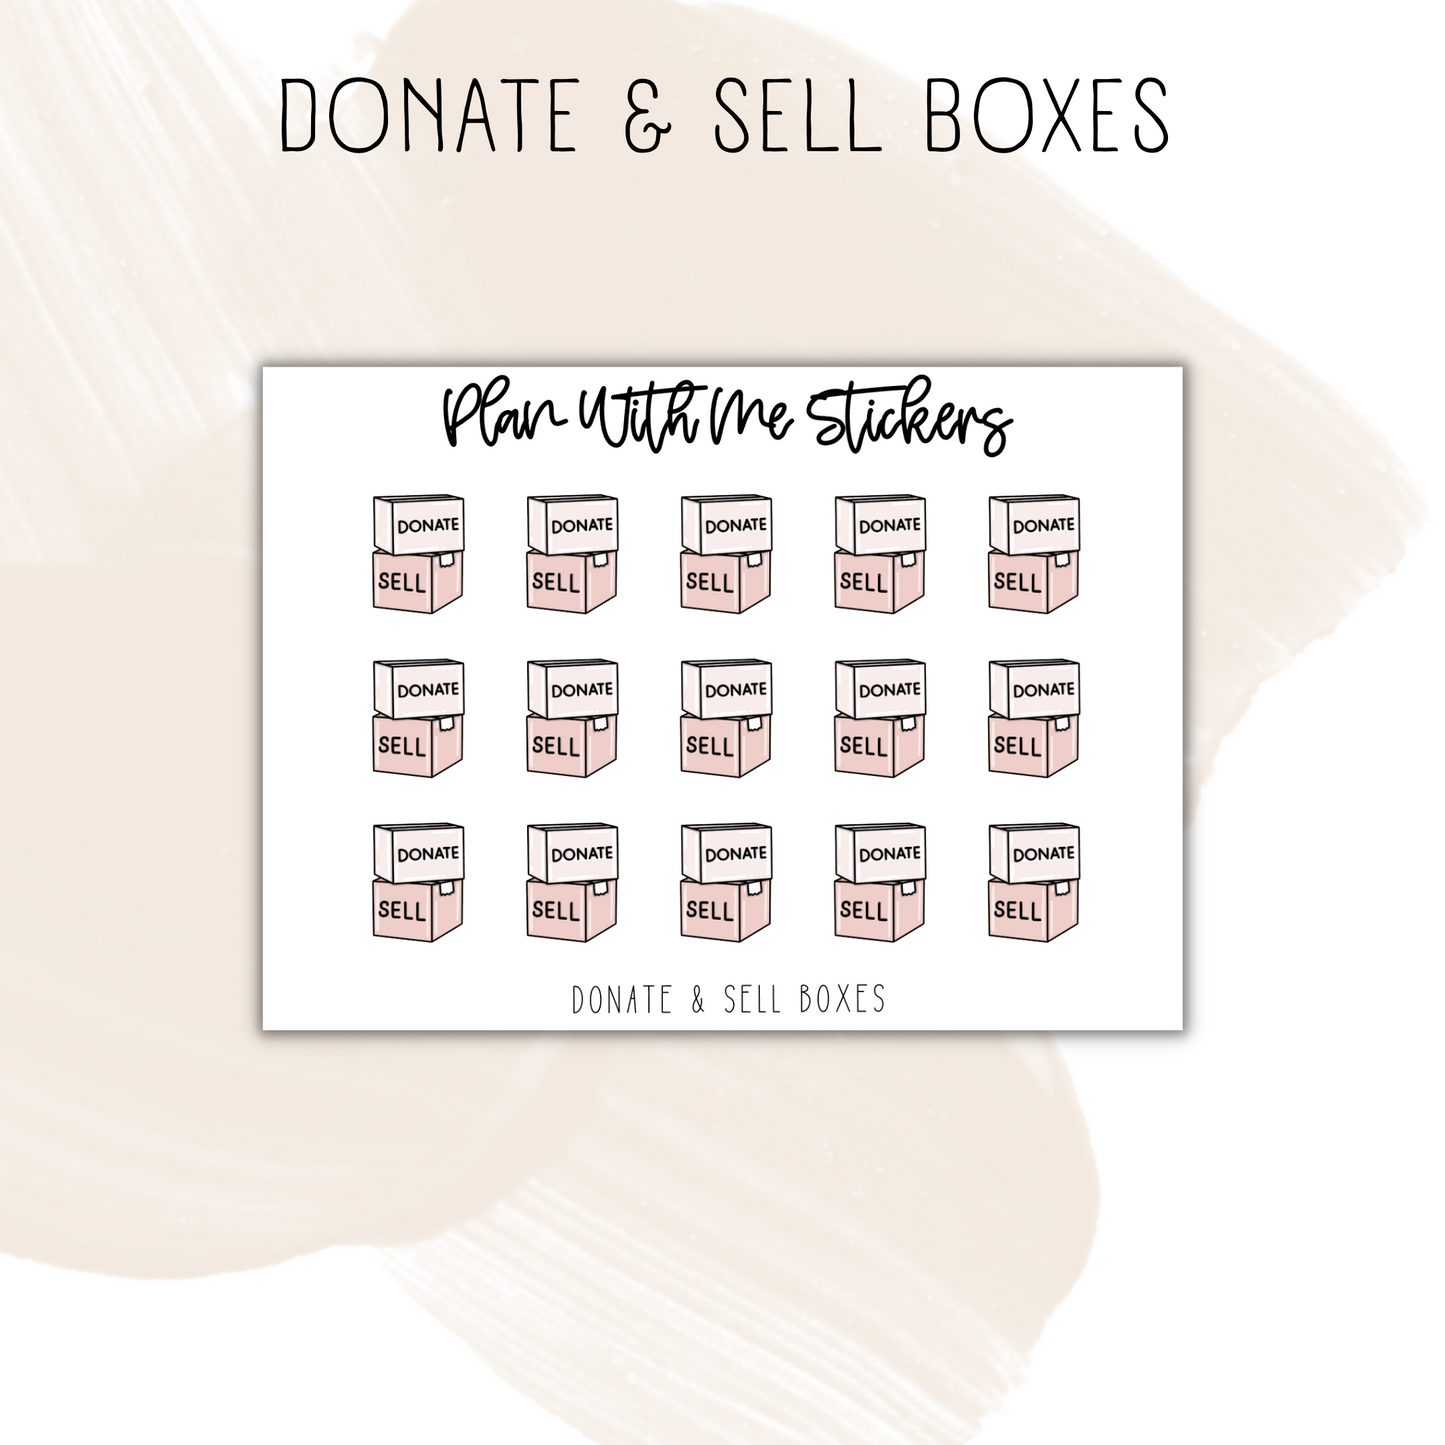 Donate & Sell Boxes | Doodles